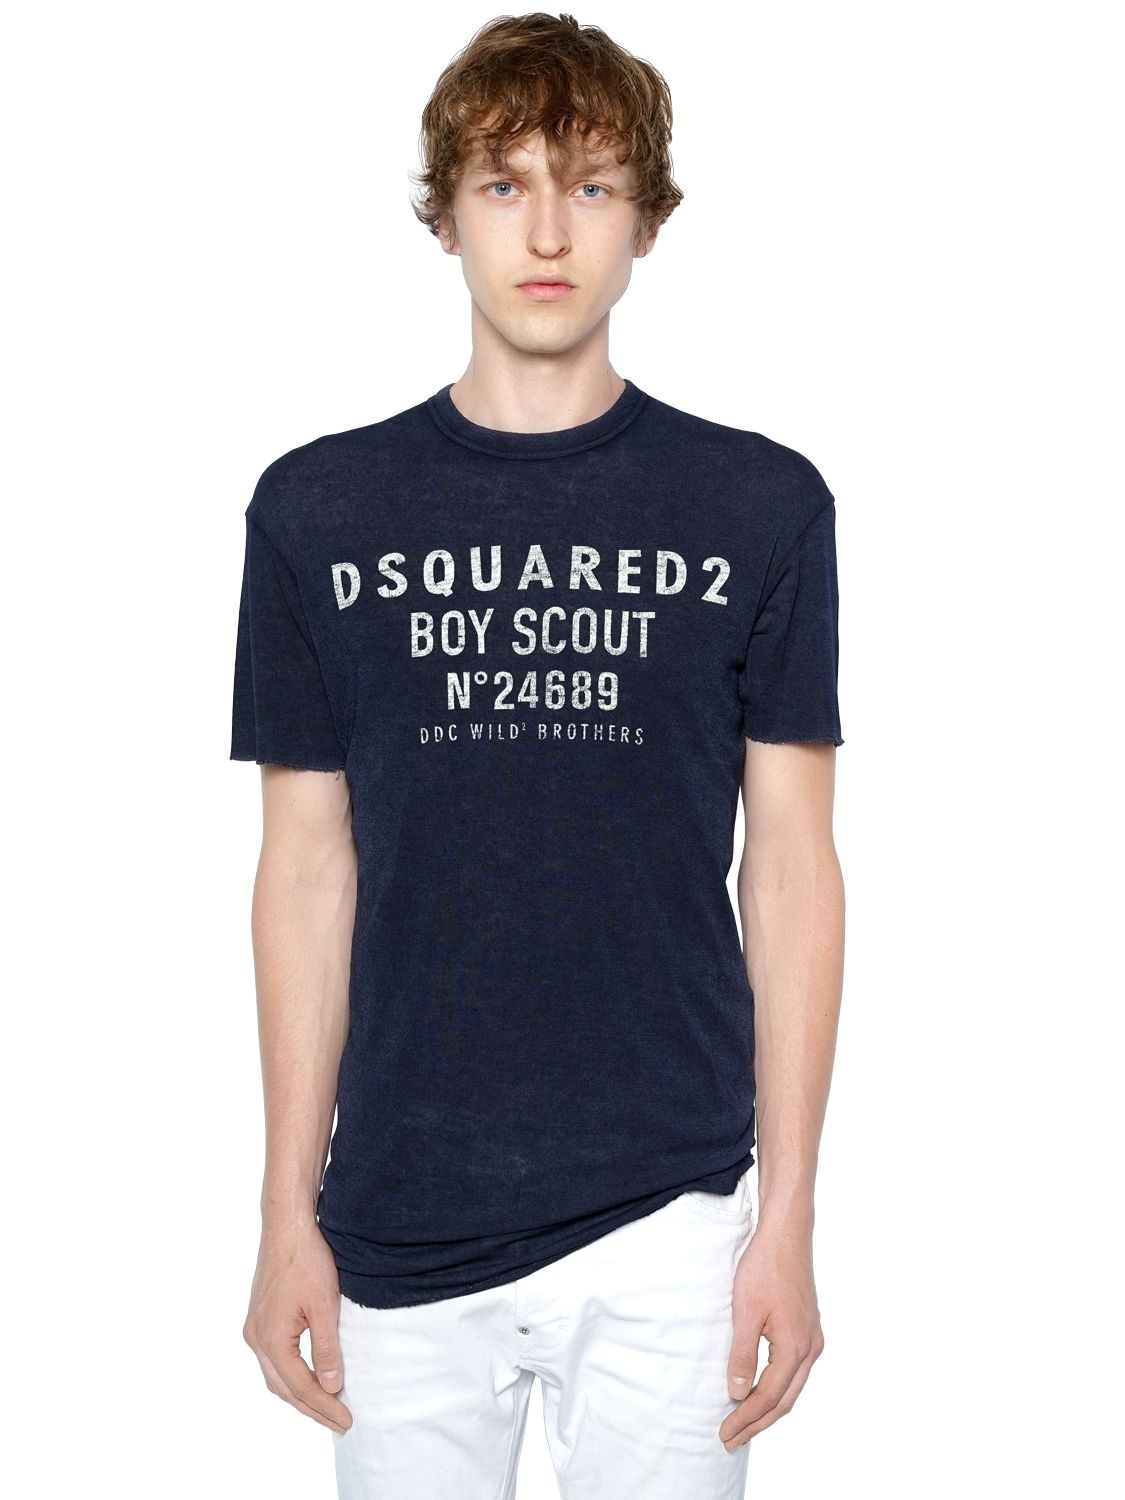 DSQUARED2 BOY SCOUT PRINTED WOOL JERSEY T-SHIRT,67IG7E003-NDC40